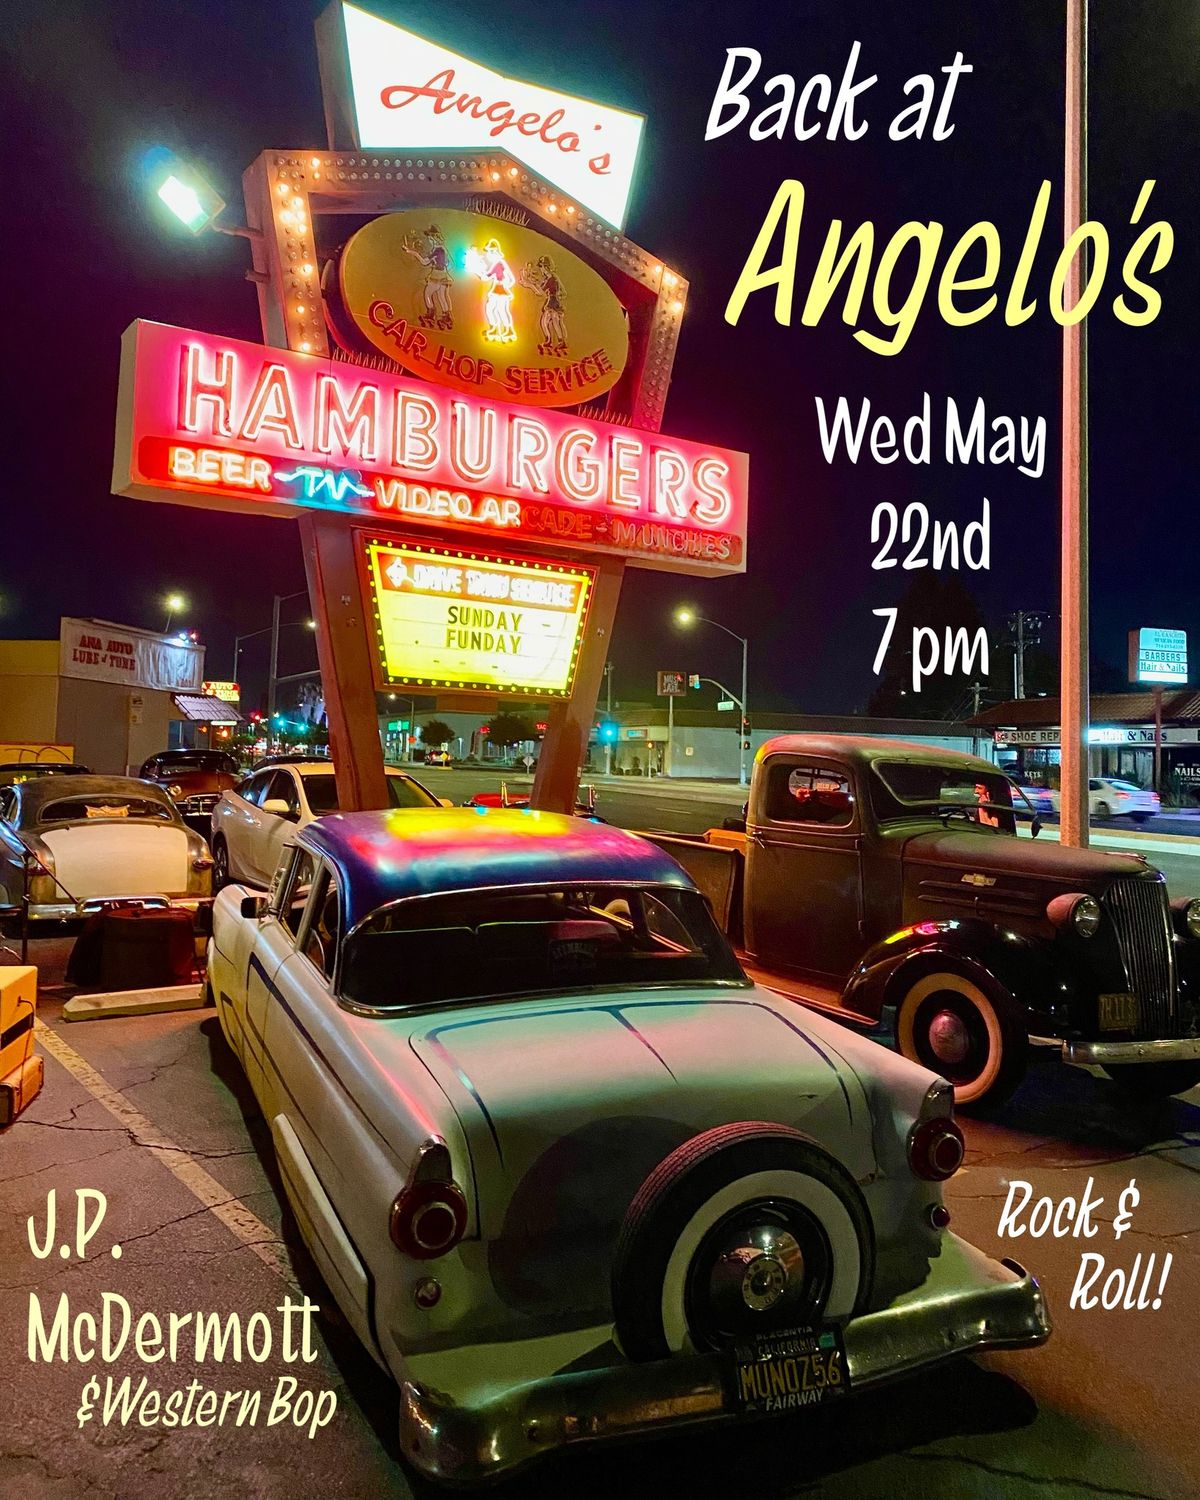 More Burger Joint Rock & Roll at Angelo's!